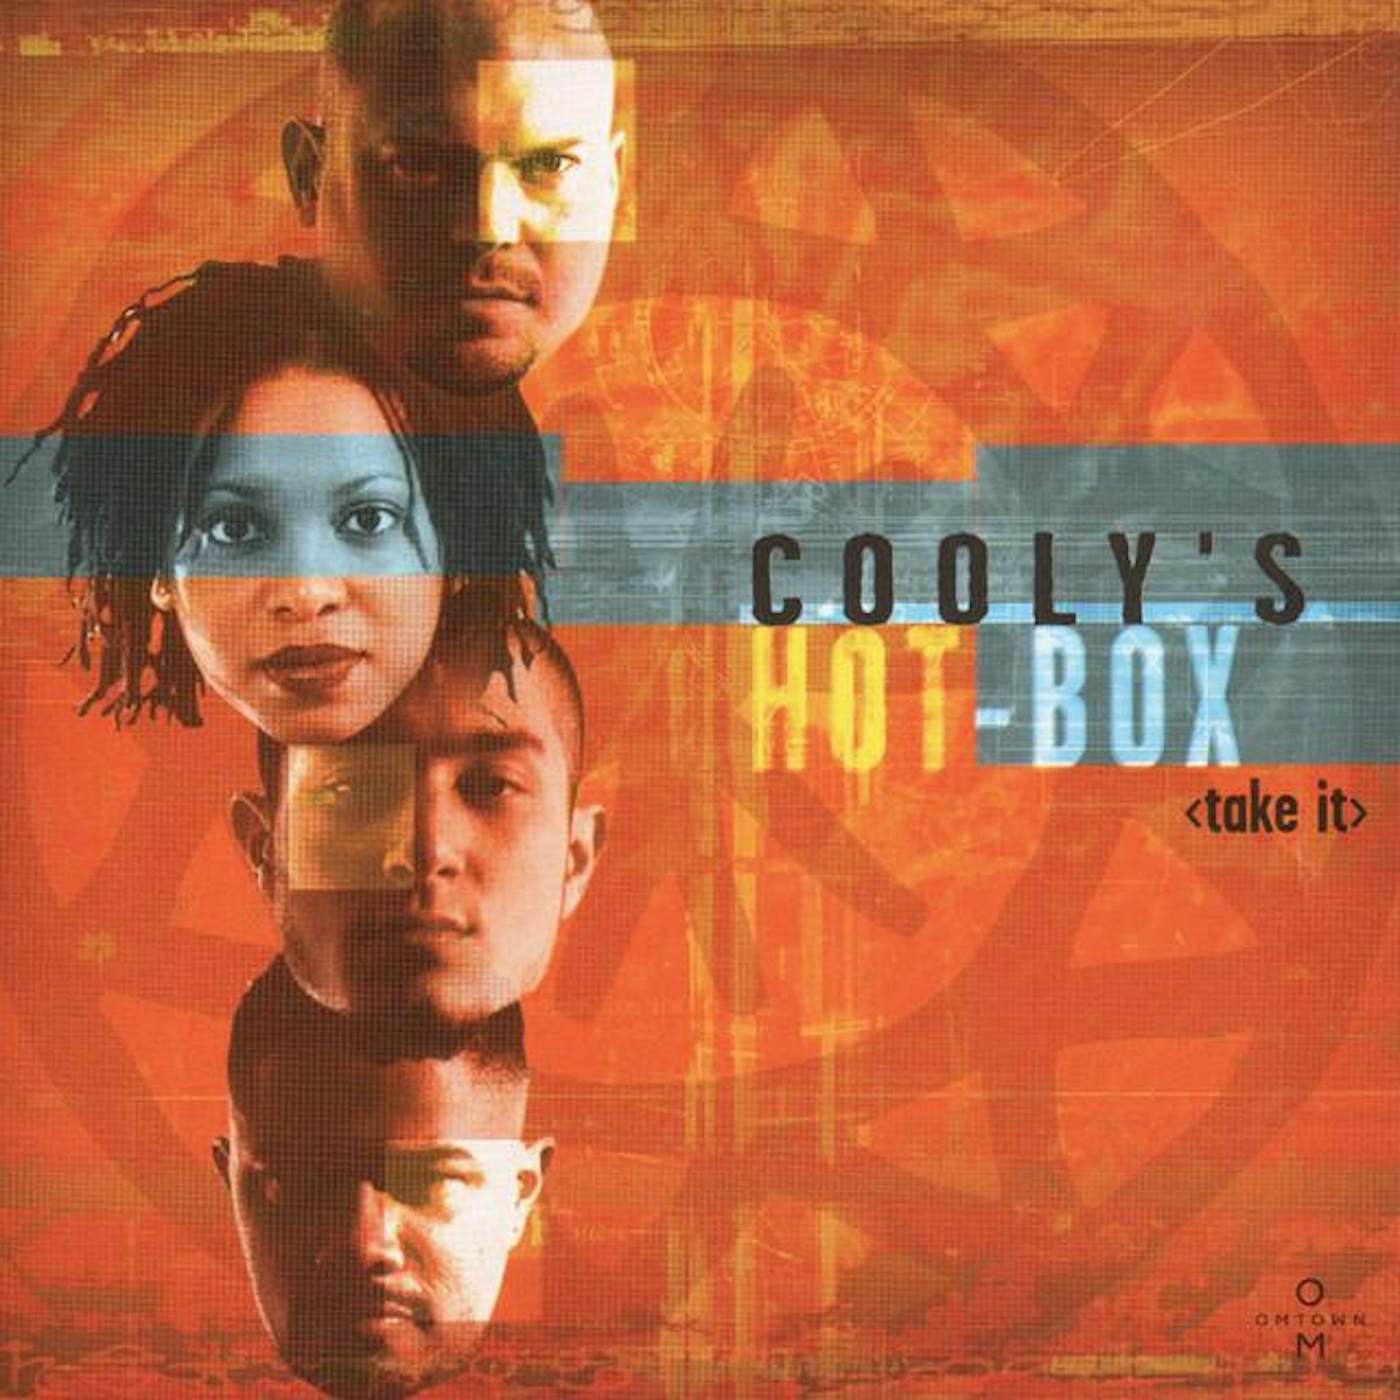 Cooly's Hot-Box